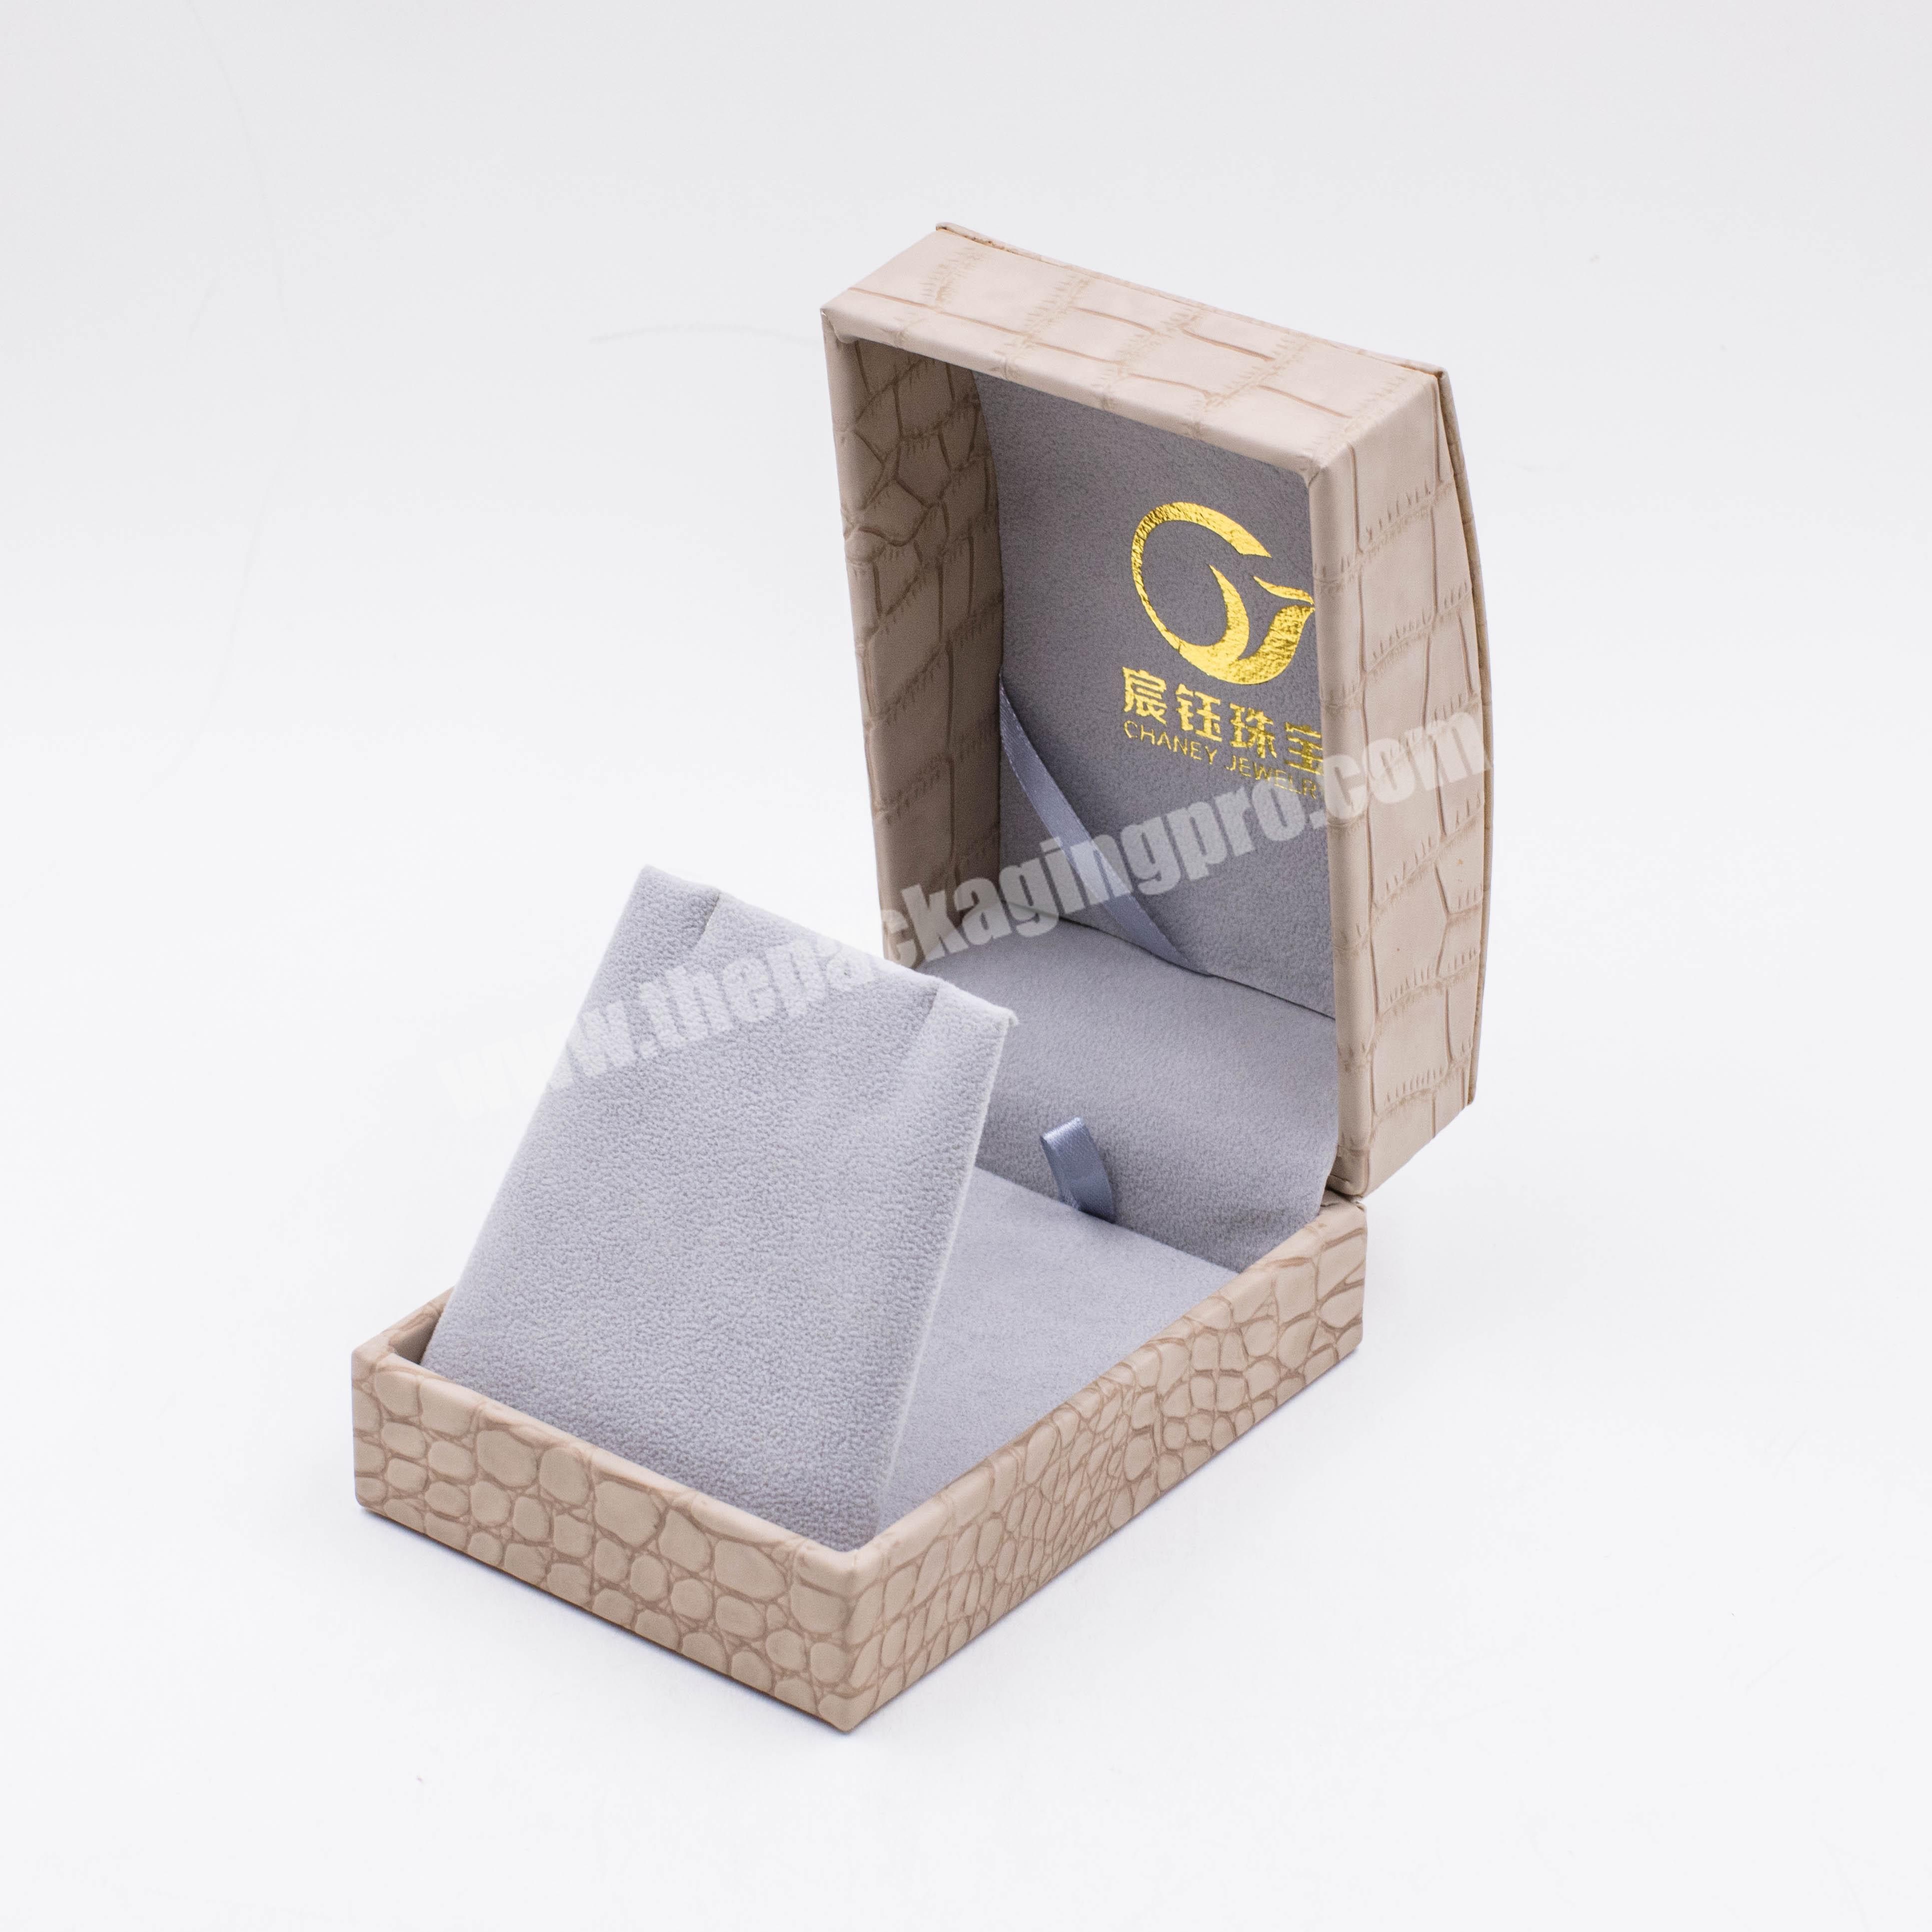 Custom Print High Quality Jewelry Box Packaging Box With gift Jewelry Boxes Case